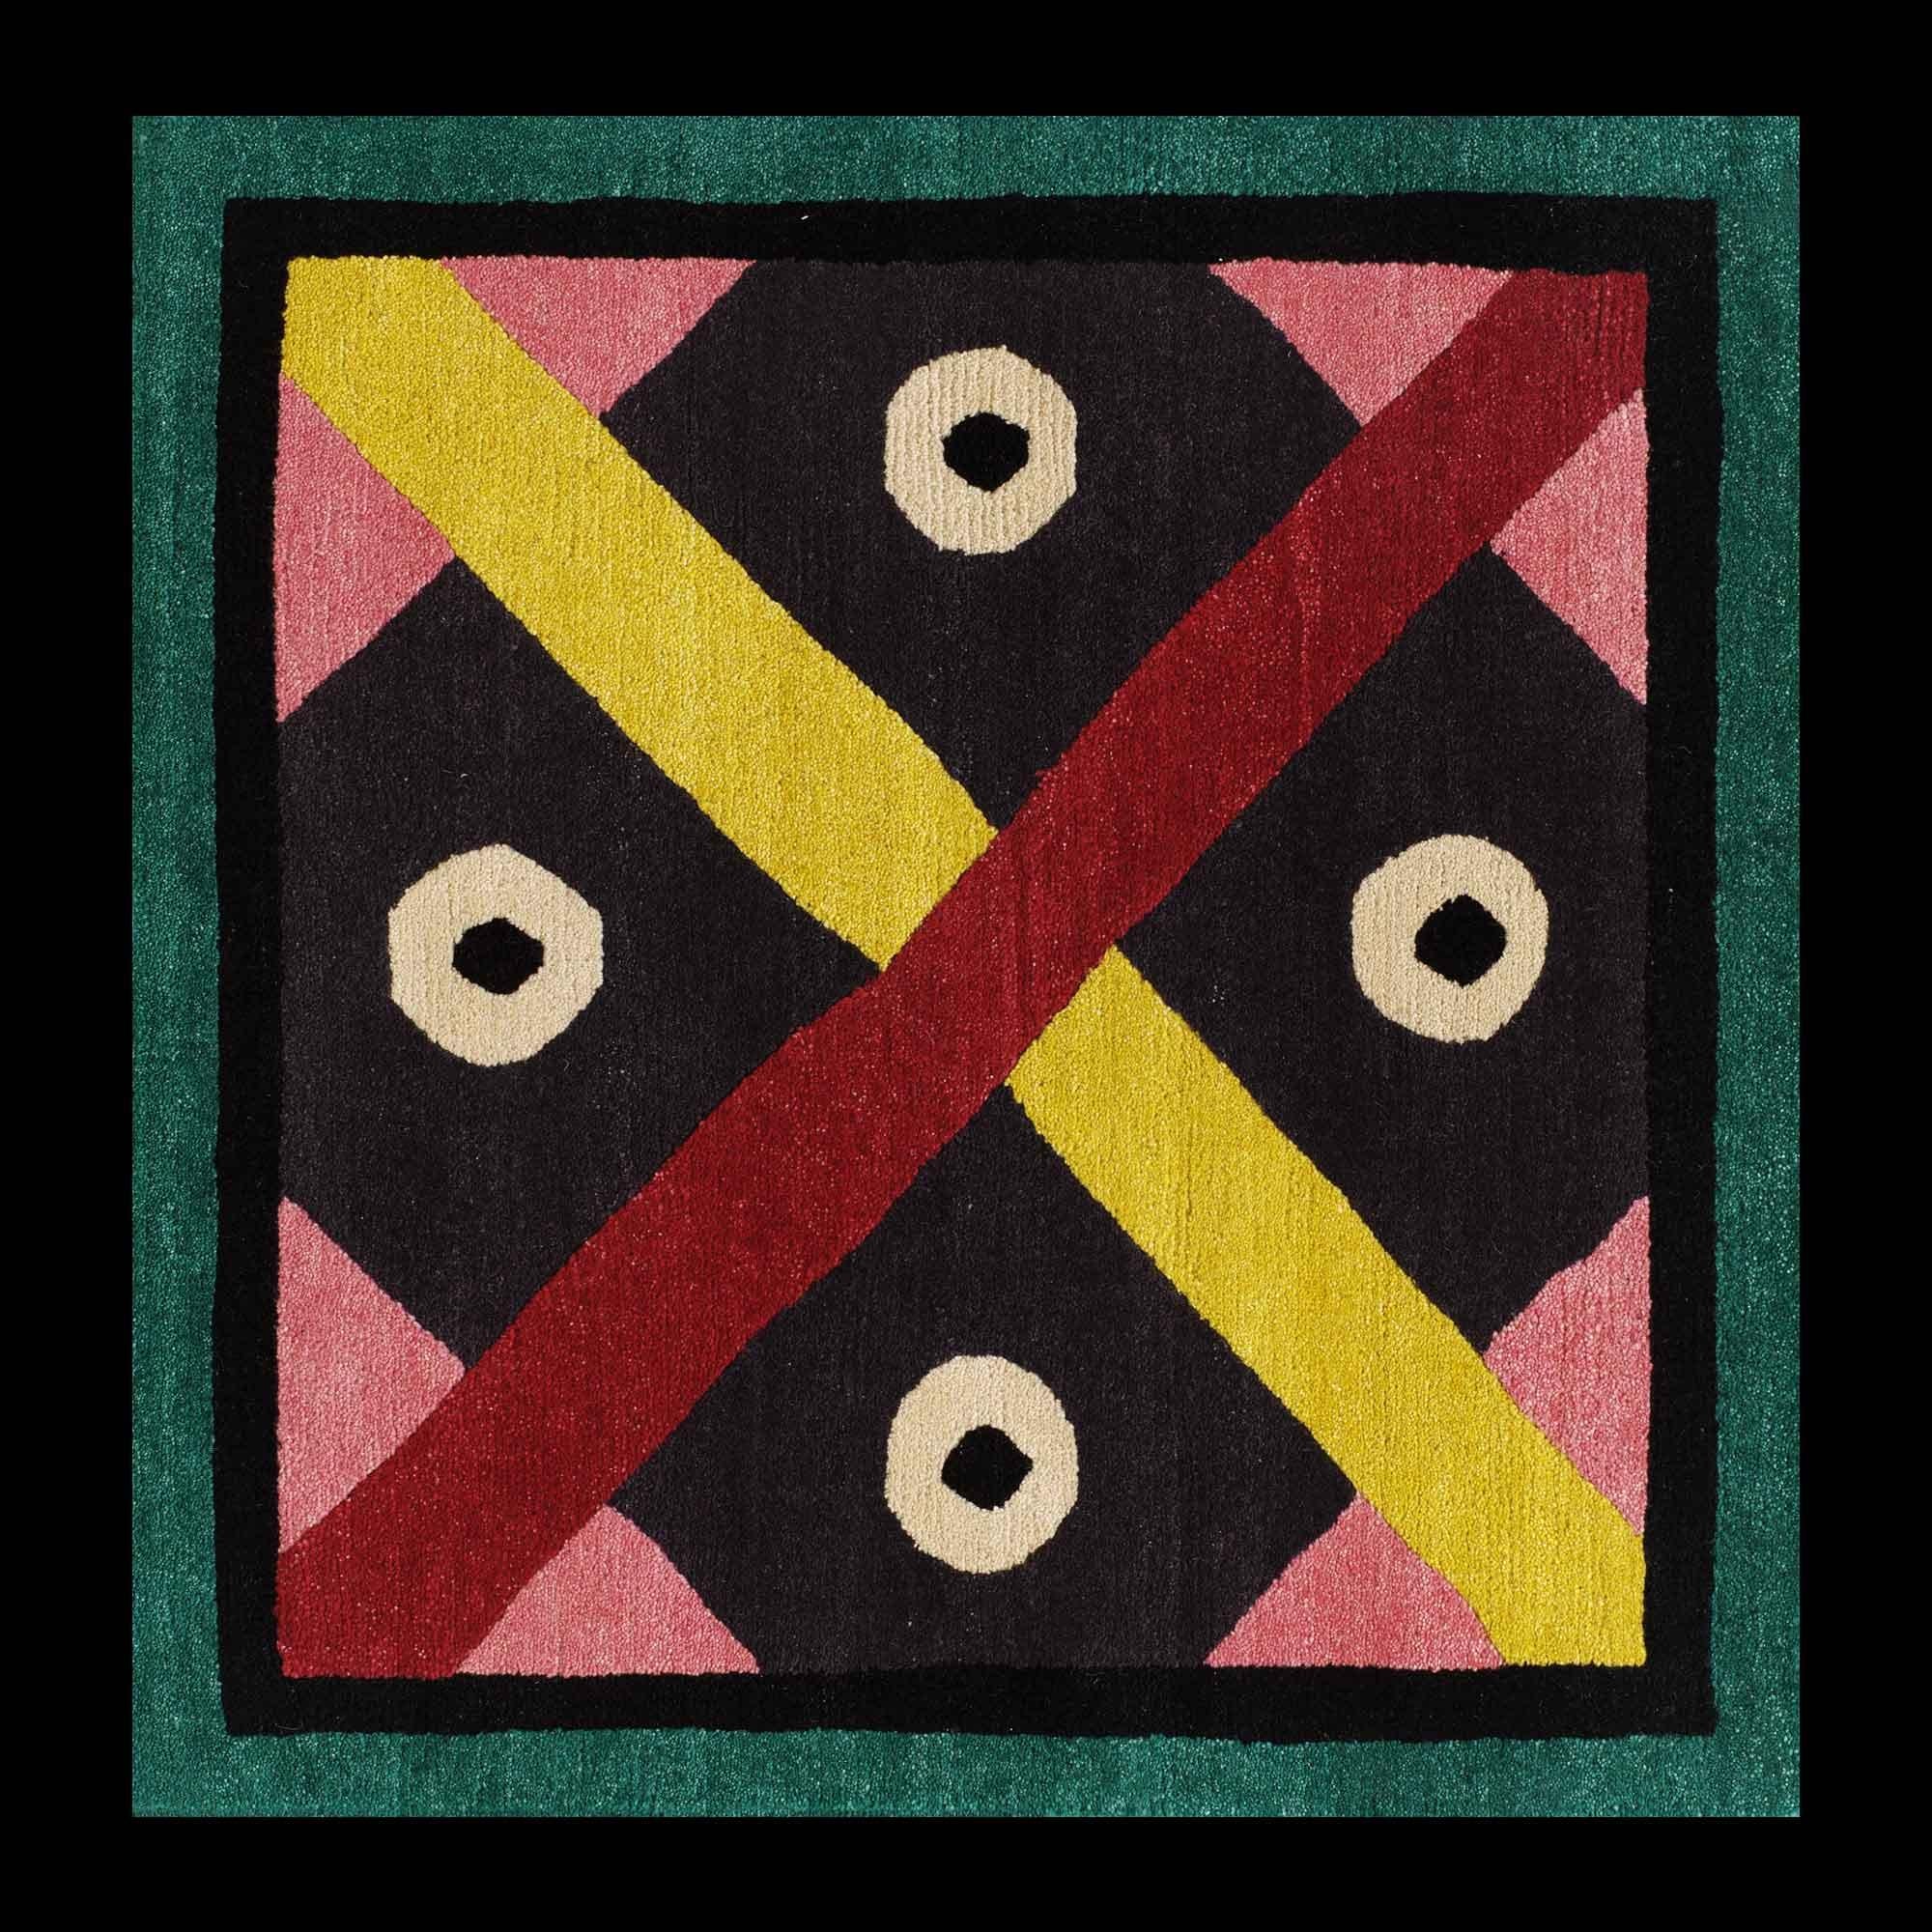 NDP23 woollen carpet by Nathalie Du Pasquier by Post Design collection/Memphis

A woollen carpet handcrafted by different Nepalese artisans. Made in a limited edition of 36 signed, numbered examples.

As the carpet is made by hand, there are